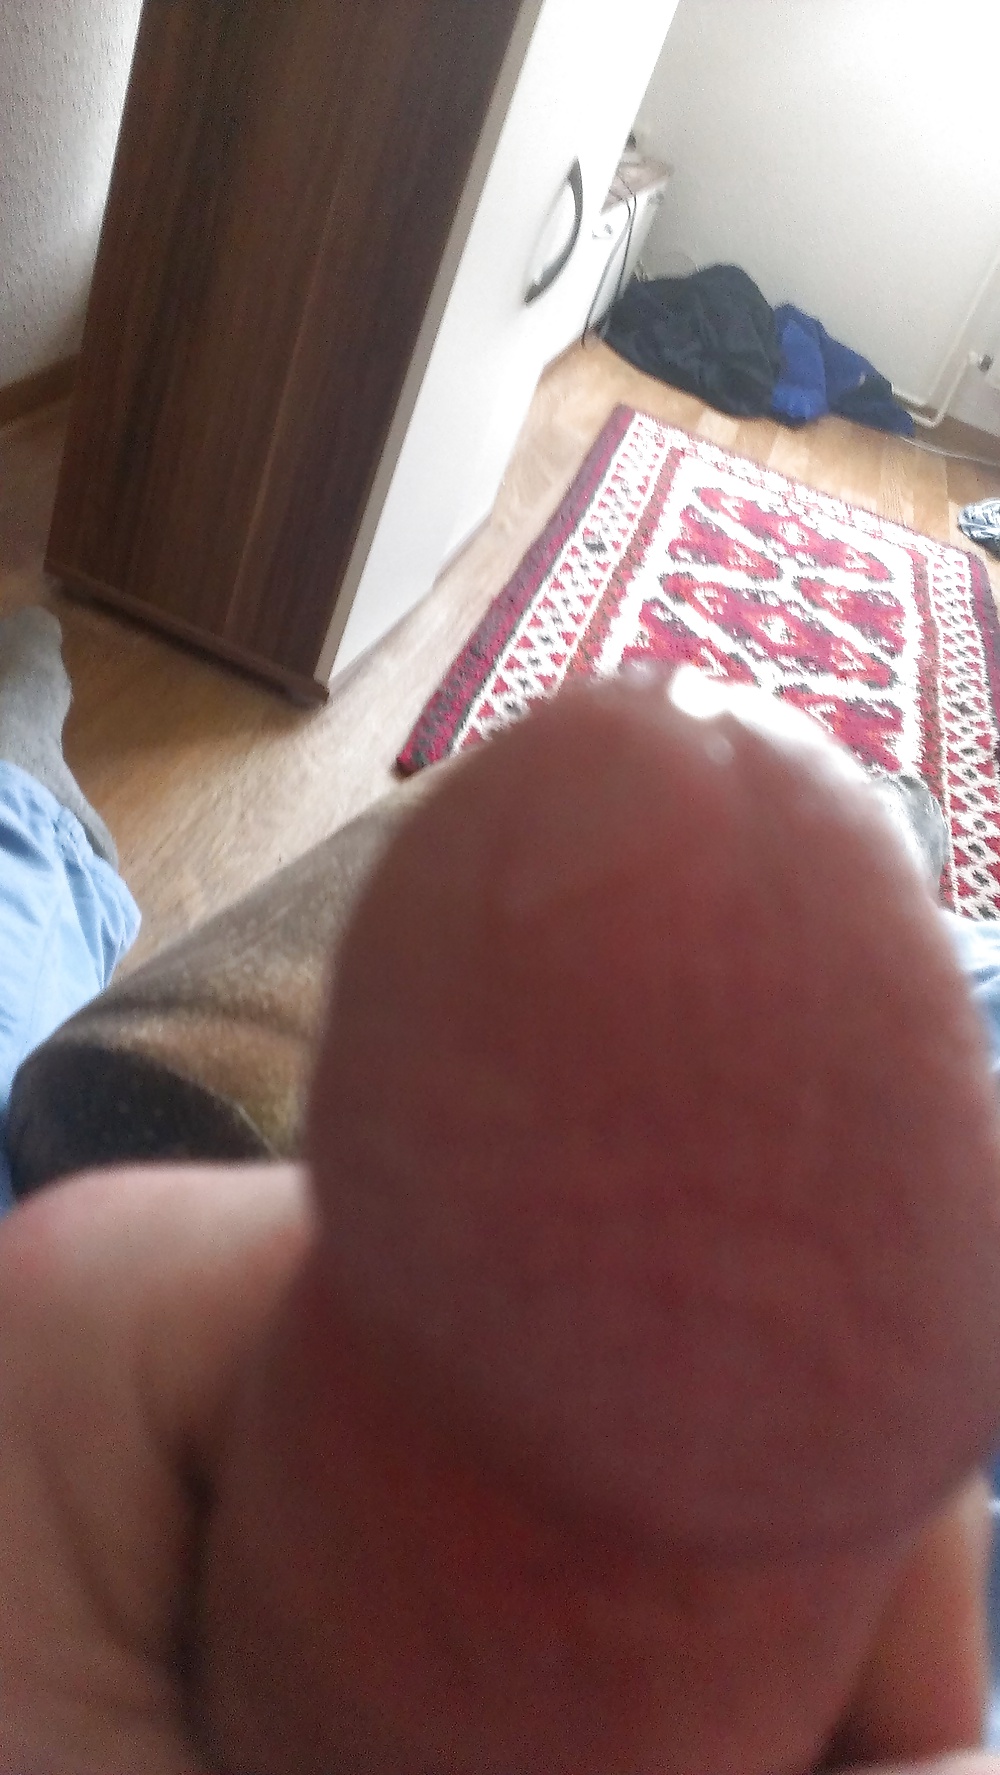 more of my dick adult photos